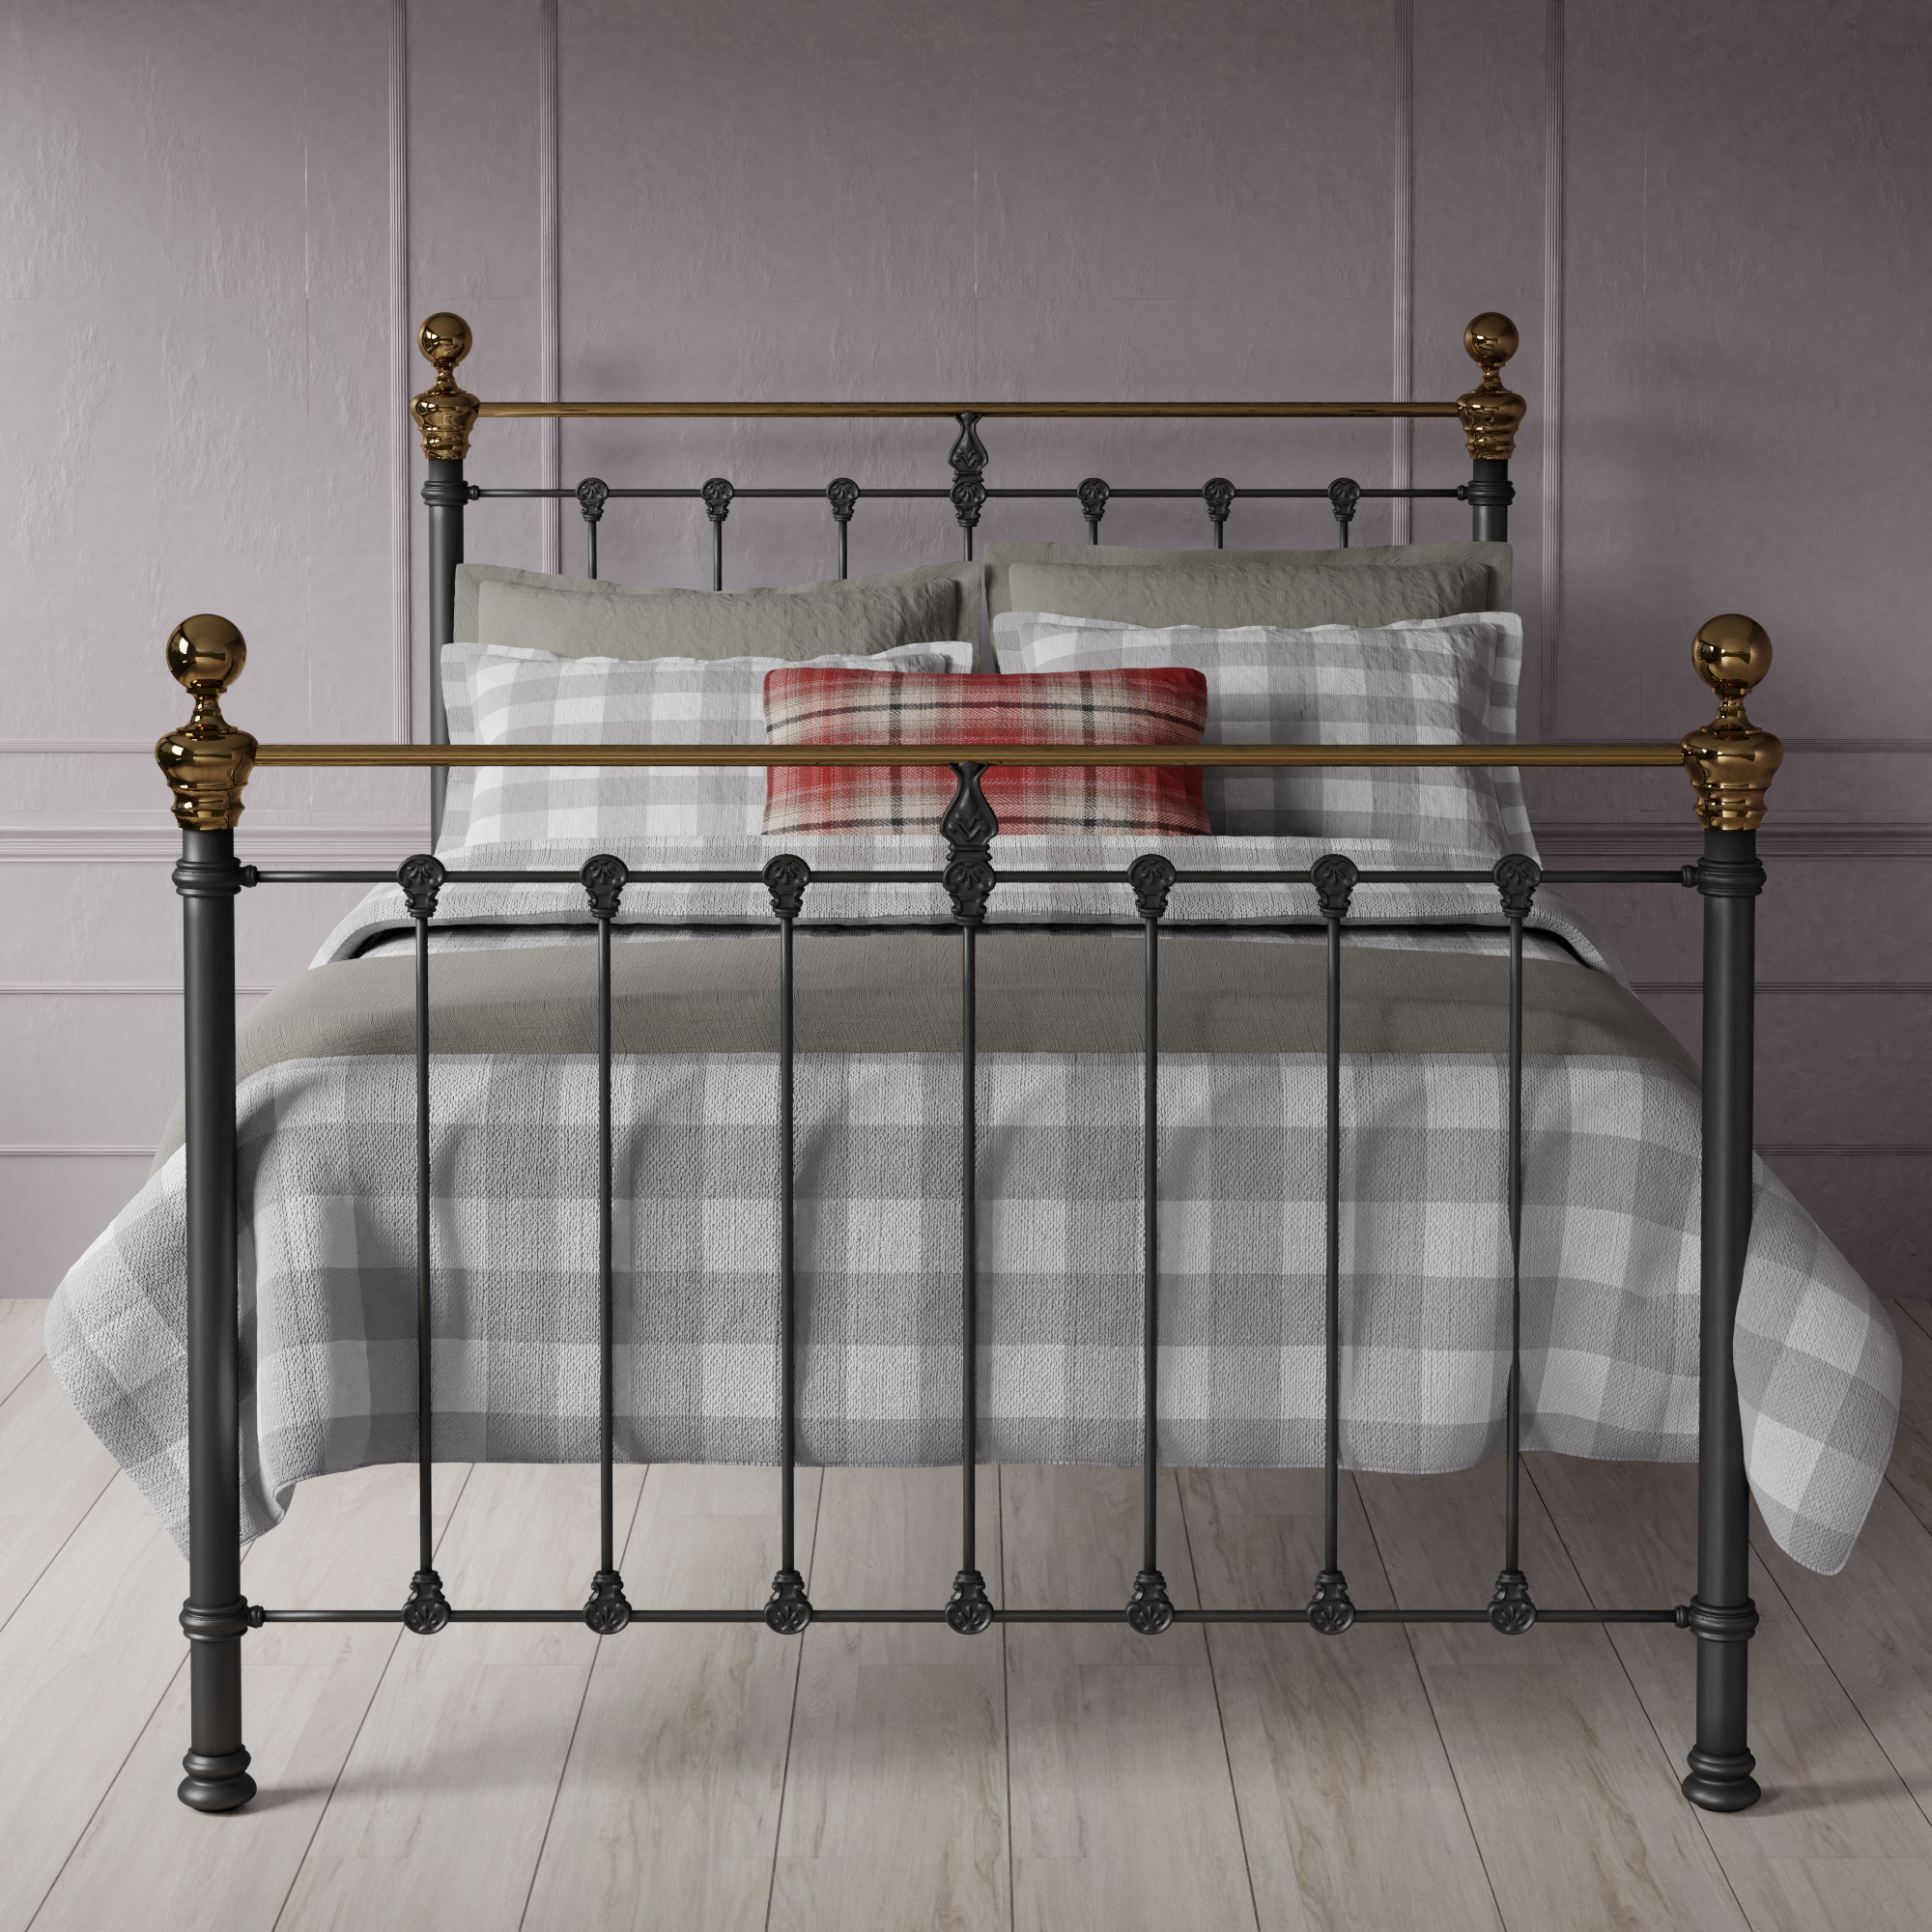 King sized metal beds by The Original Bed Co.